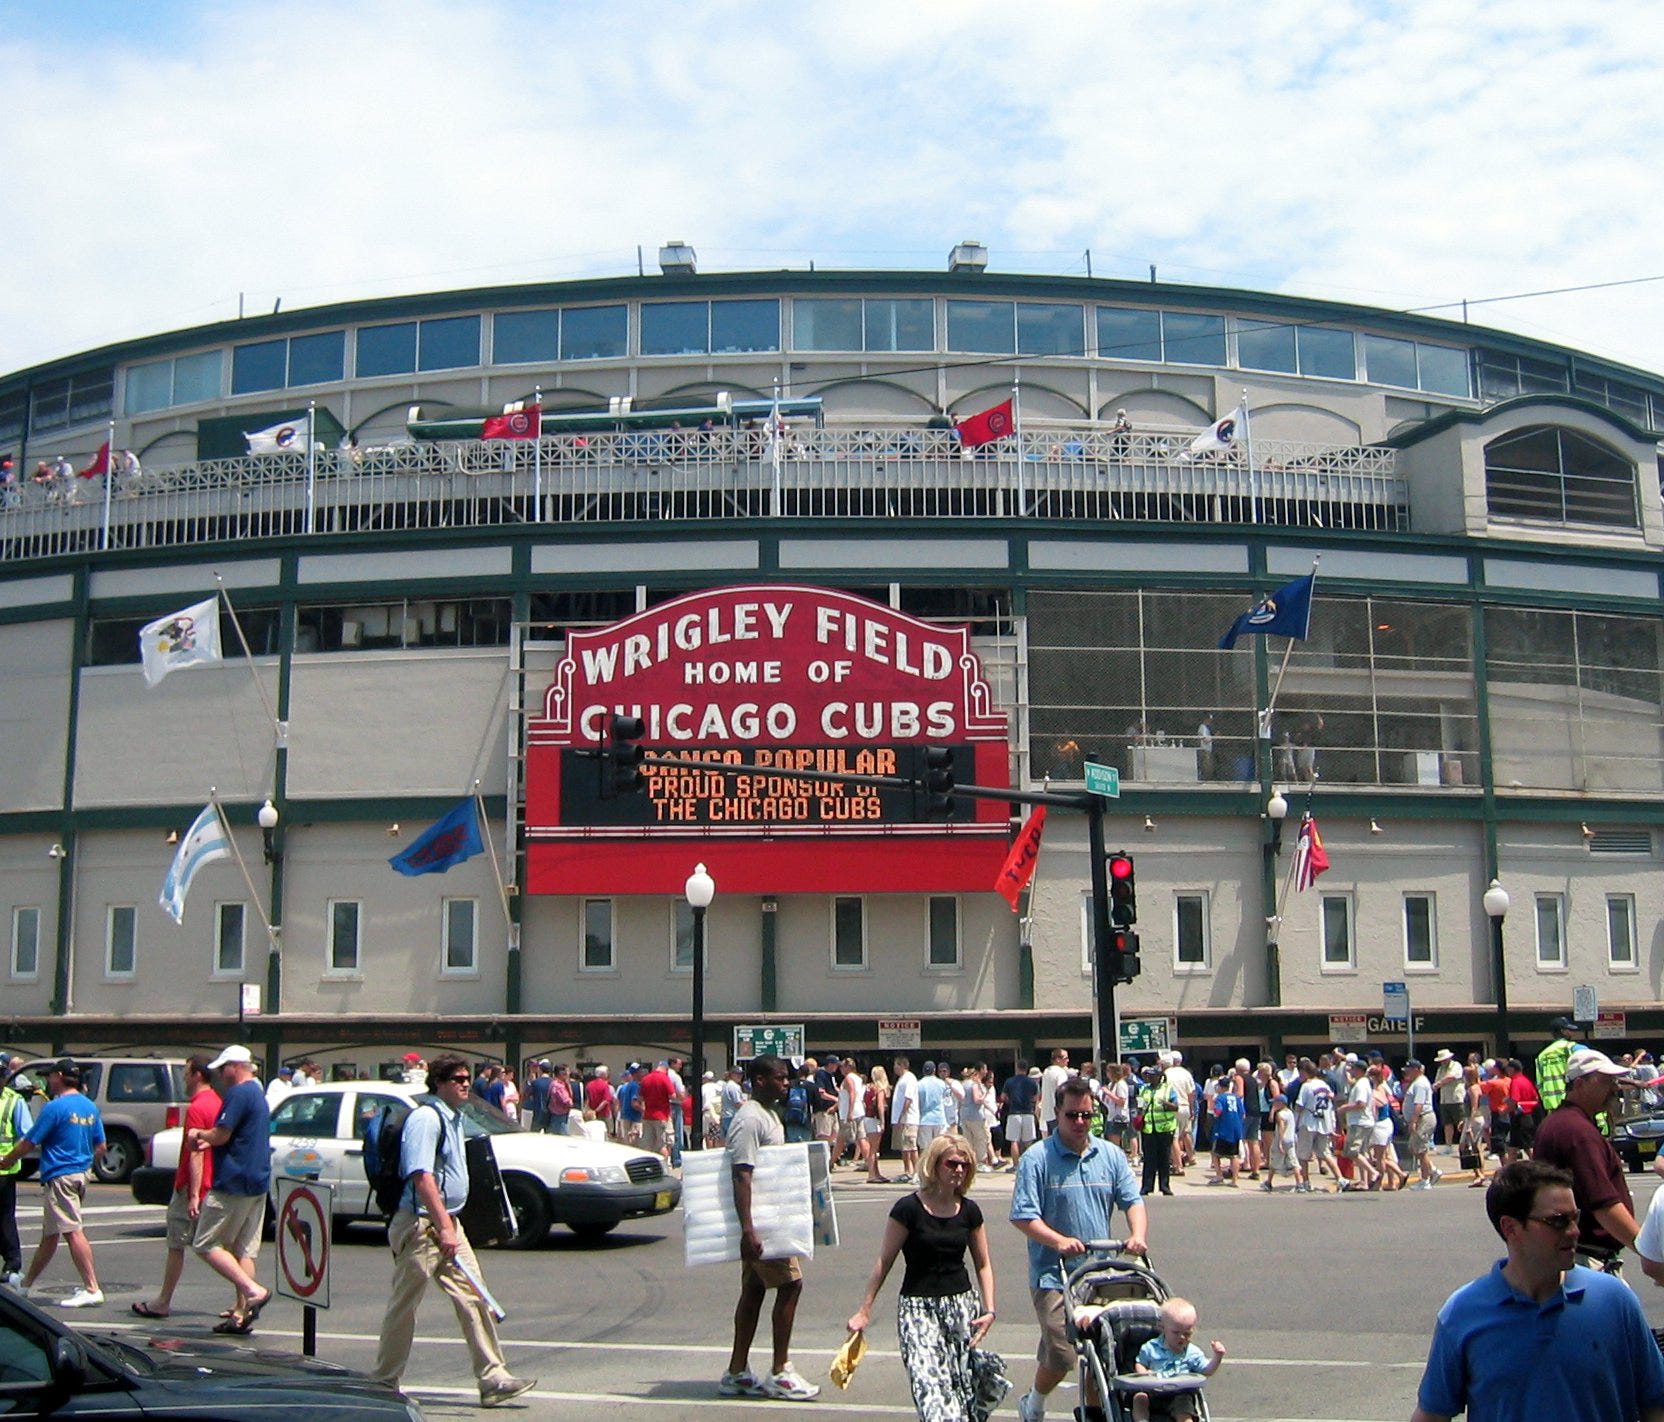 Wrigley Field, Chicago: Located on Chicago's near North Side, the ivy-studded Wrigley Field has been the home of Chicago Cubs baseball since 1916. The oldest National League ball park was designed by Zachary Taylor Davis in 1914 for the Chicago Whale